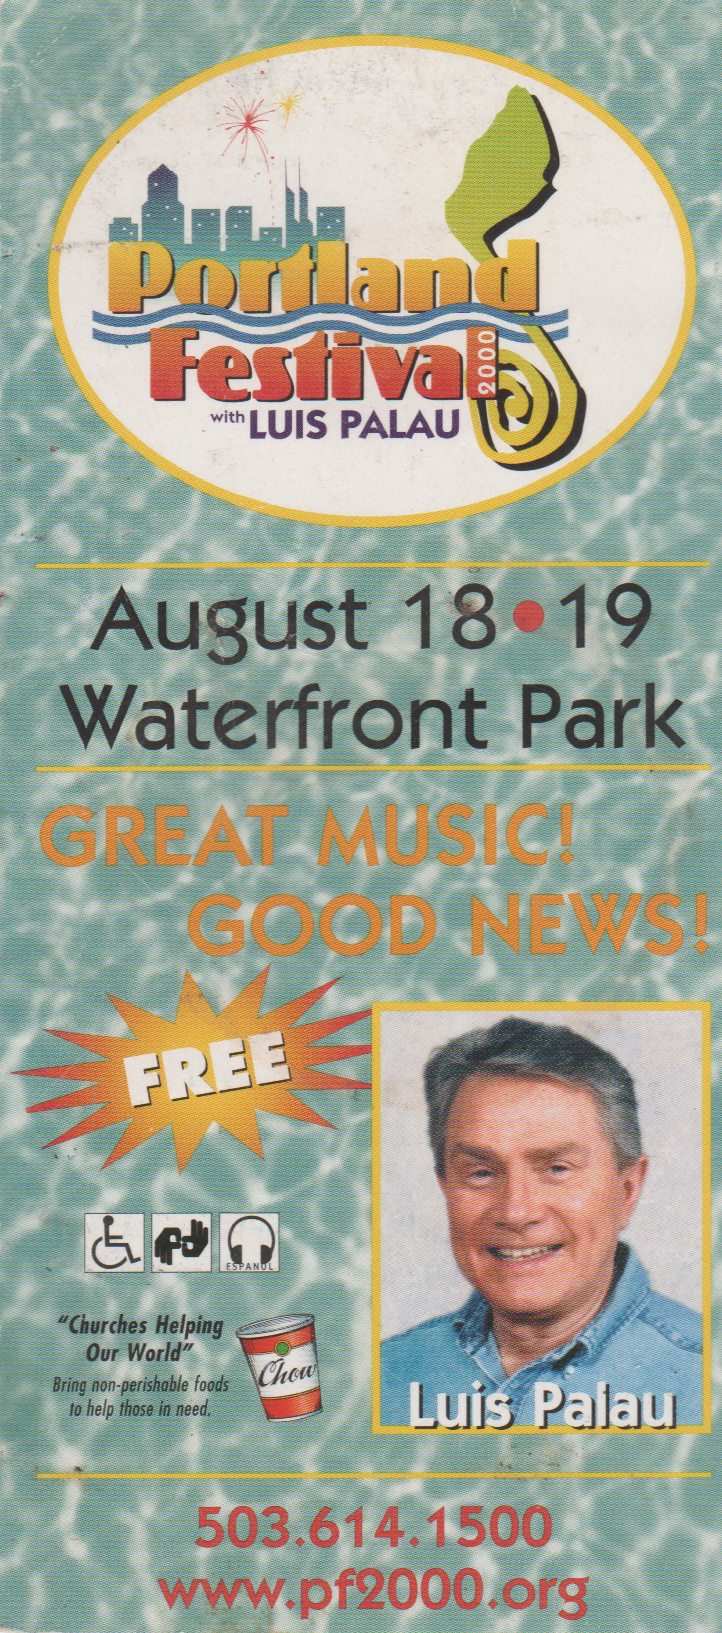 2000-08-18 - Friday - Portland Festival With Luis Palau on Friday and Saturday, we went as a CCBC youth group on Friday or most likely it was on Saturday via the MAX-1.png